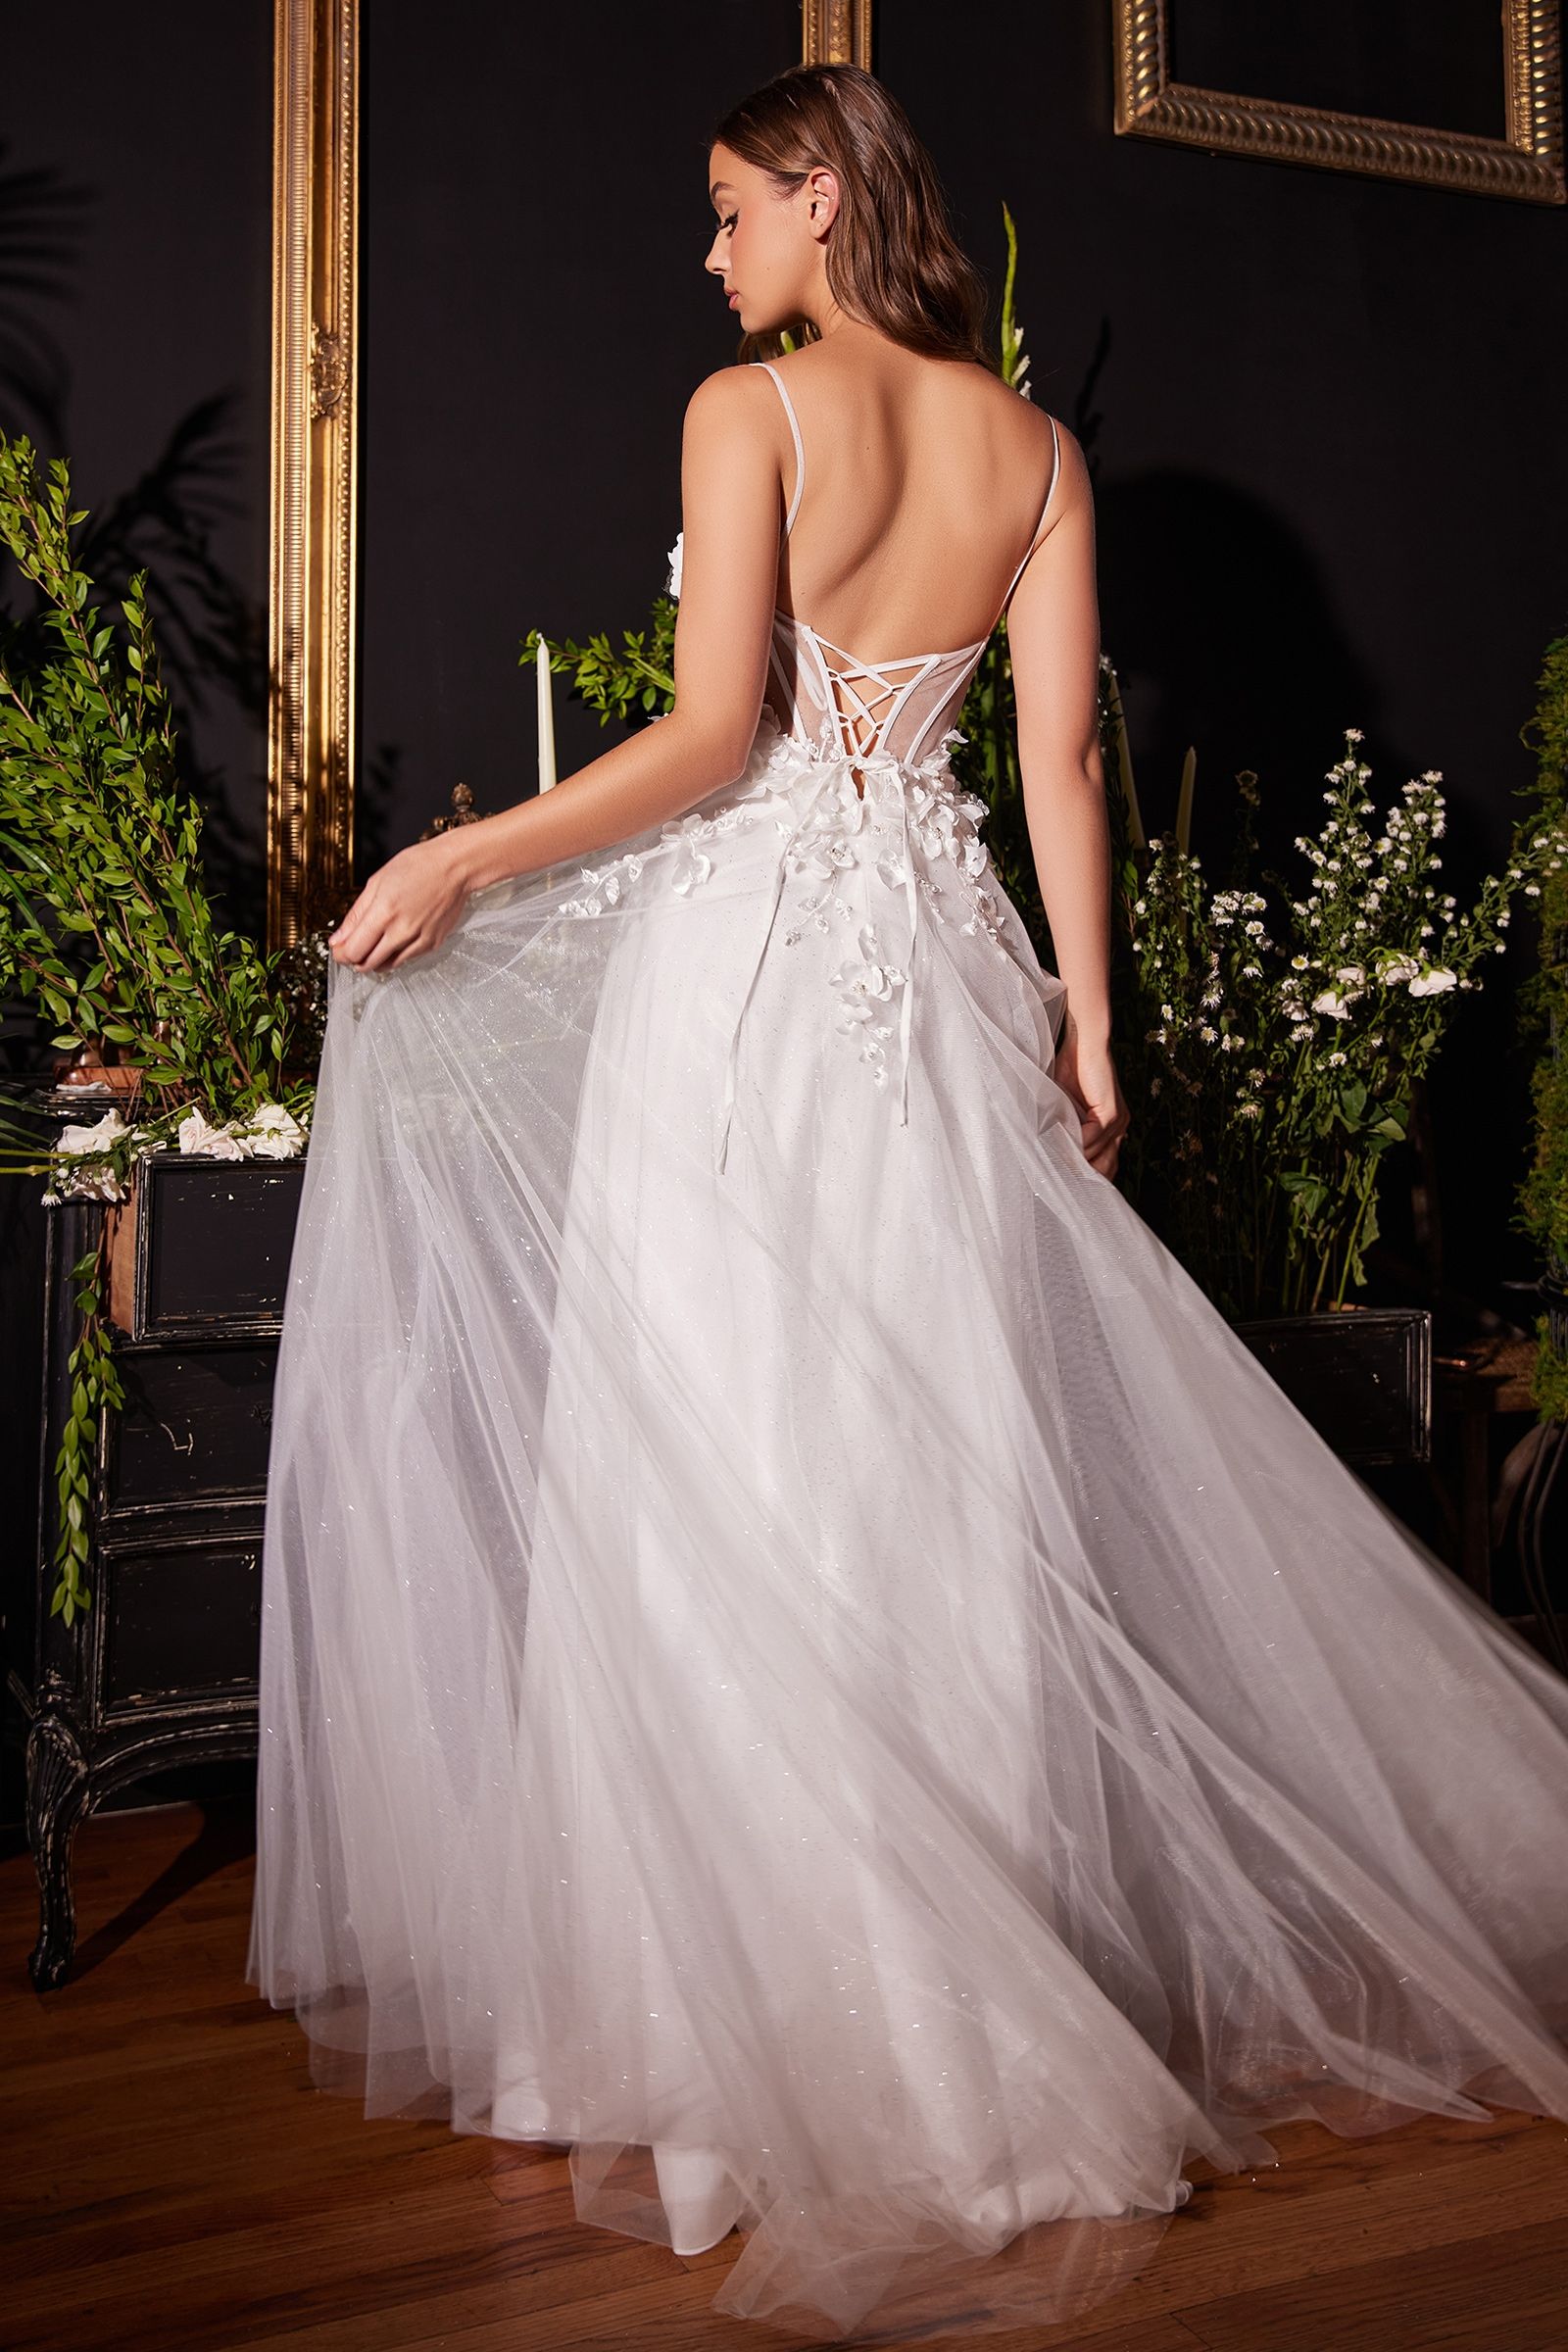 Tulle A-Line Gown with Floral Applique-smcdress